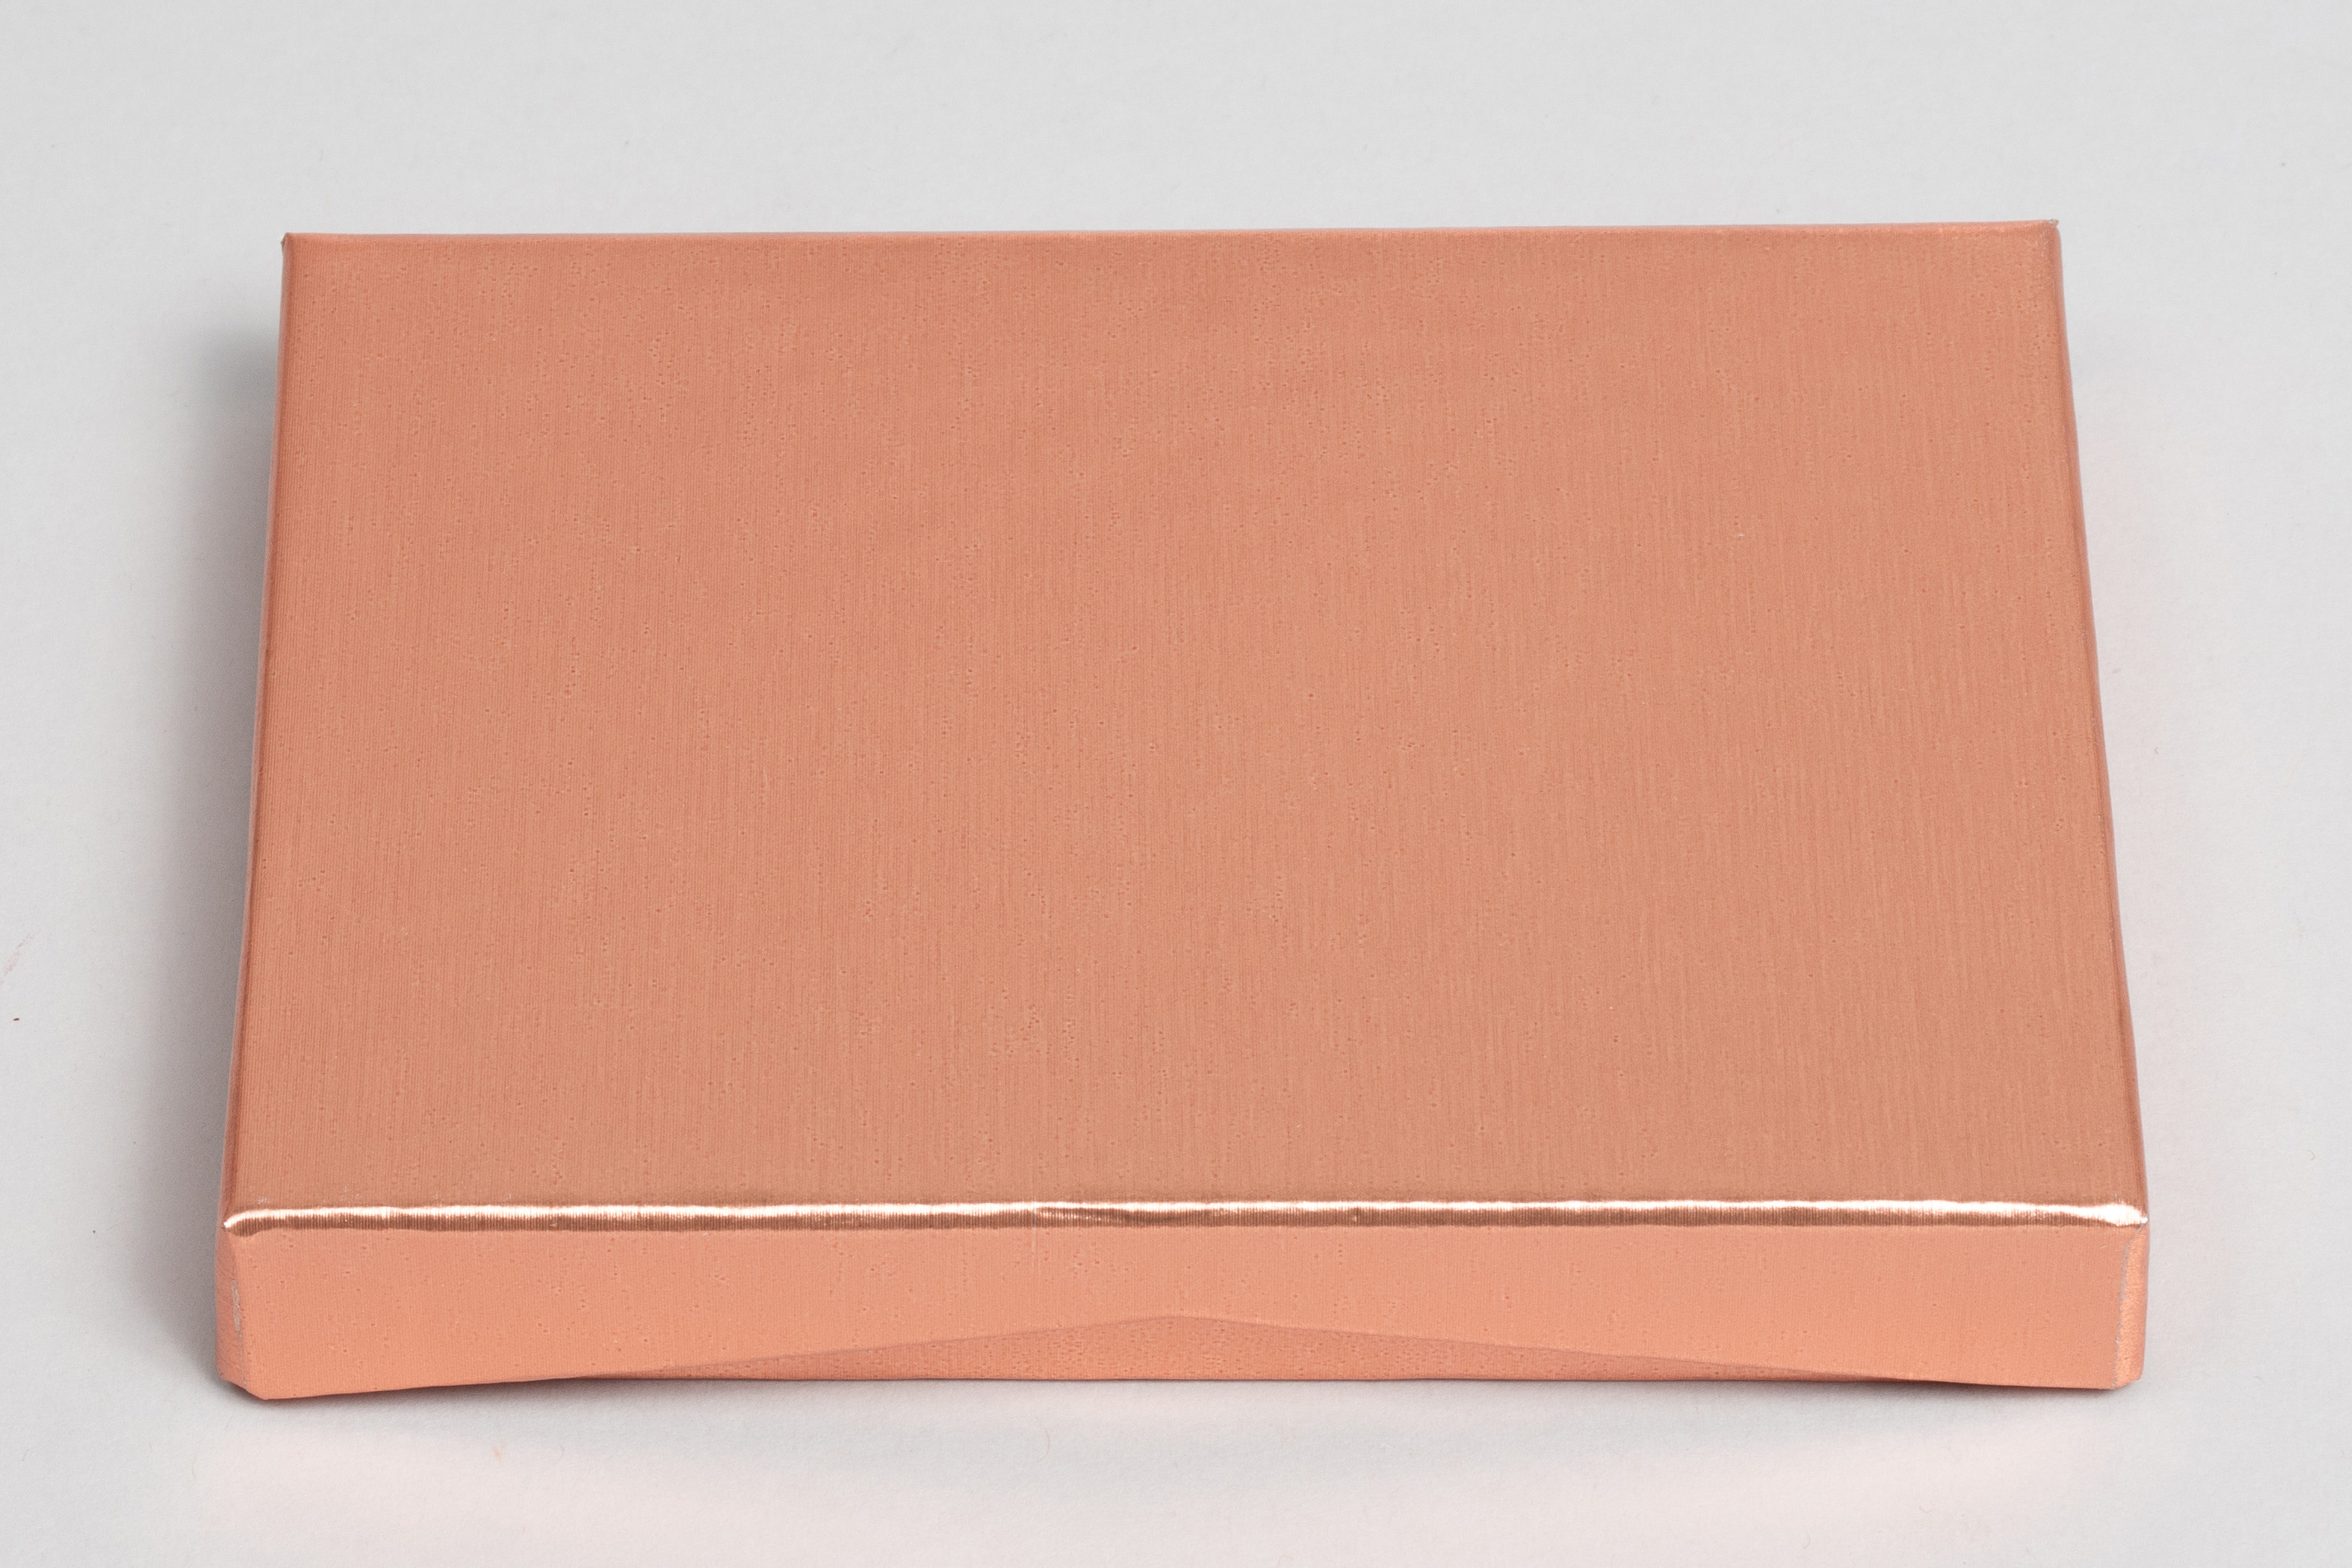 4-5/8 x 3-3/8 x 5/8 BRUSHED ROSE GOLD GIFT CARD BOX WITH POP-UP INSERT